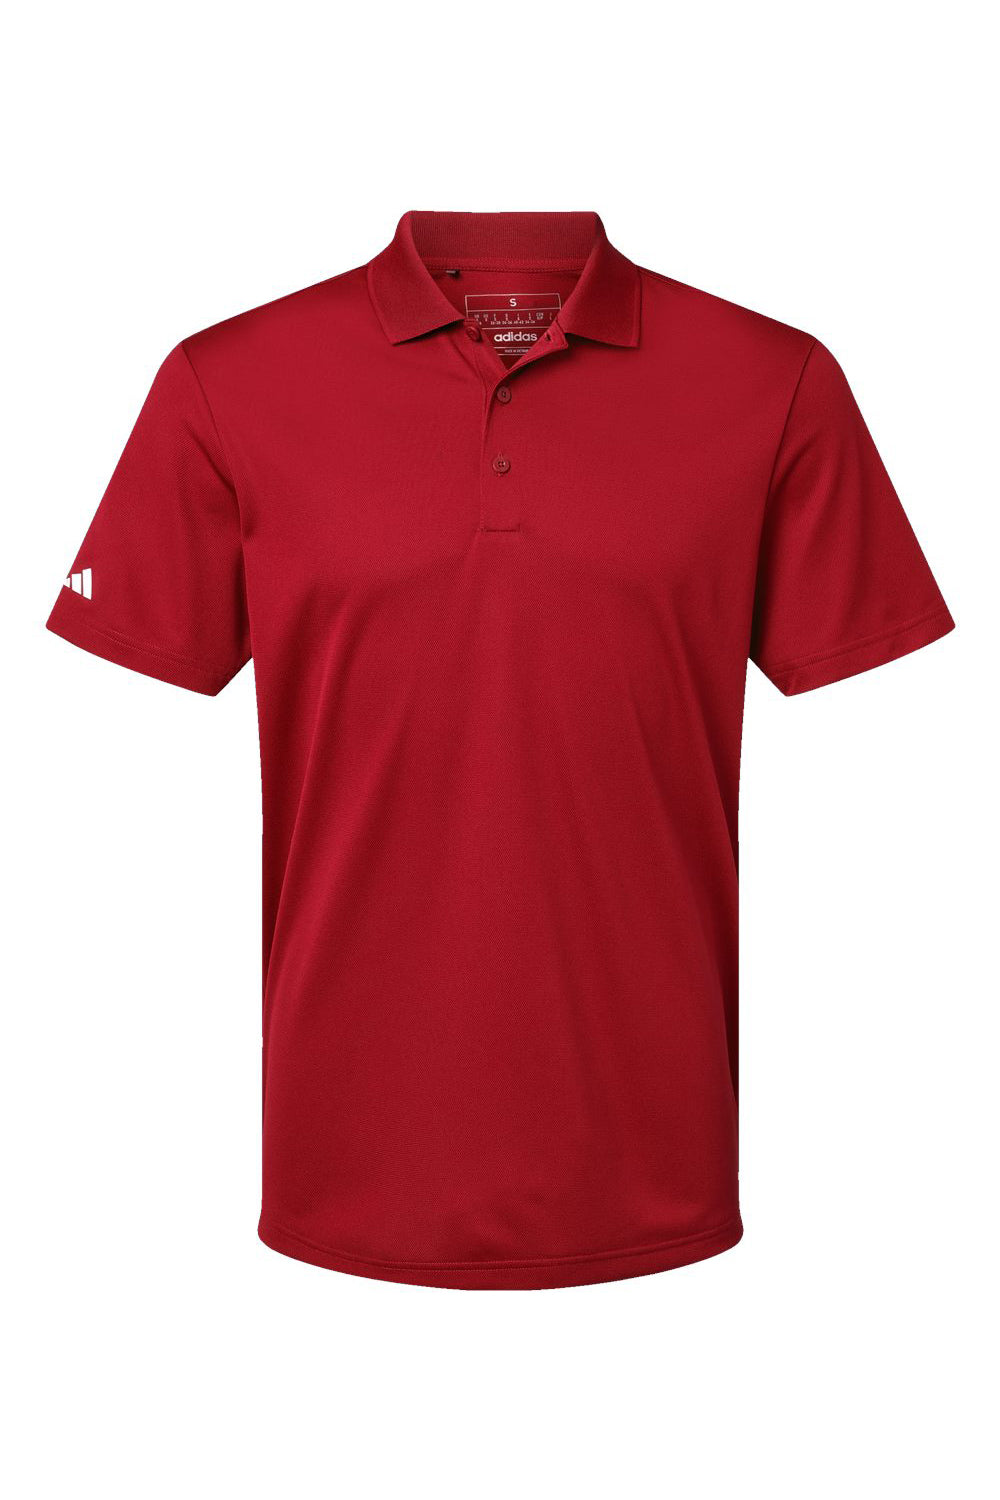 Adidas A430 Mens Basic Short Sleeve Polo Shirt Power Red Flat Front